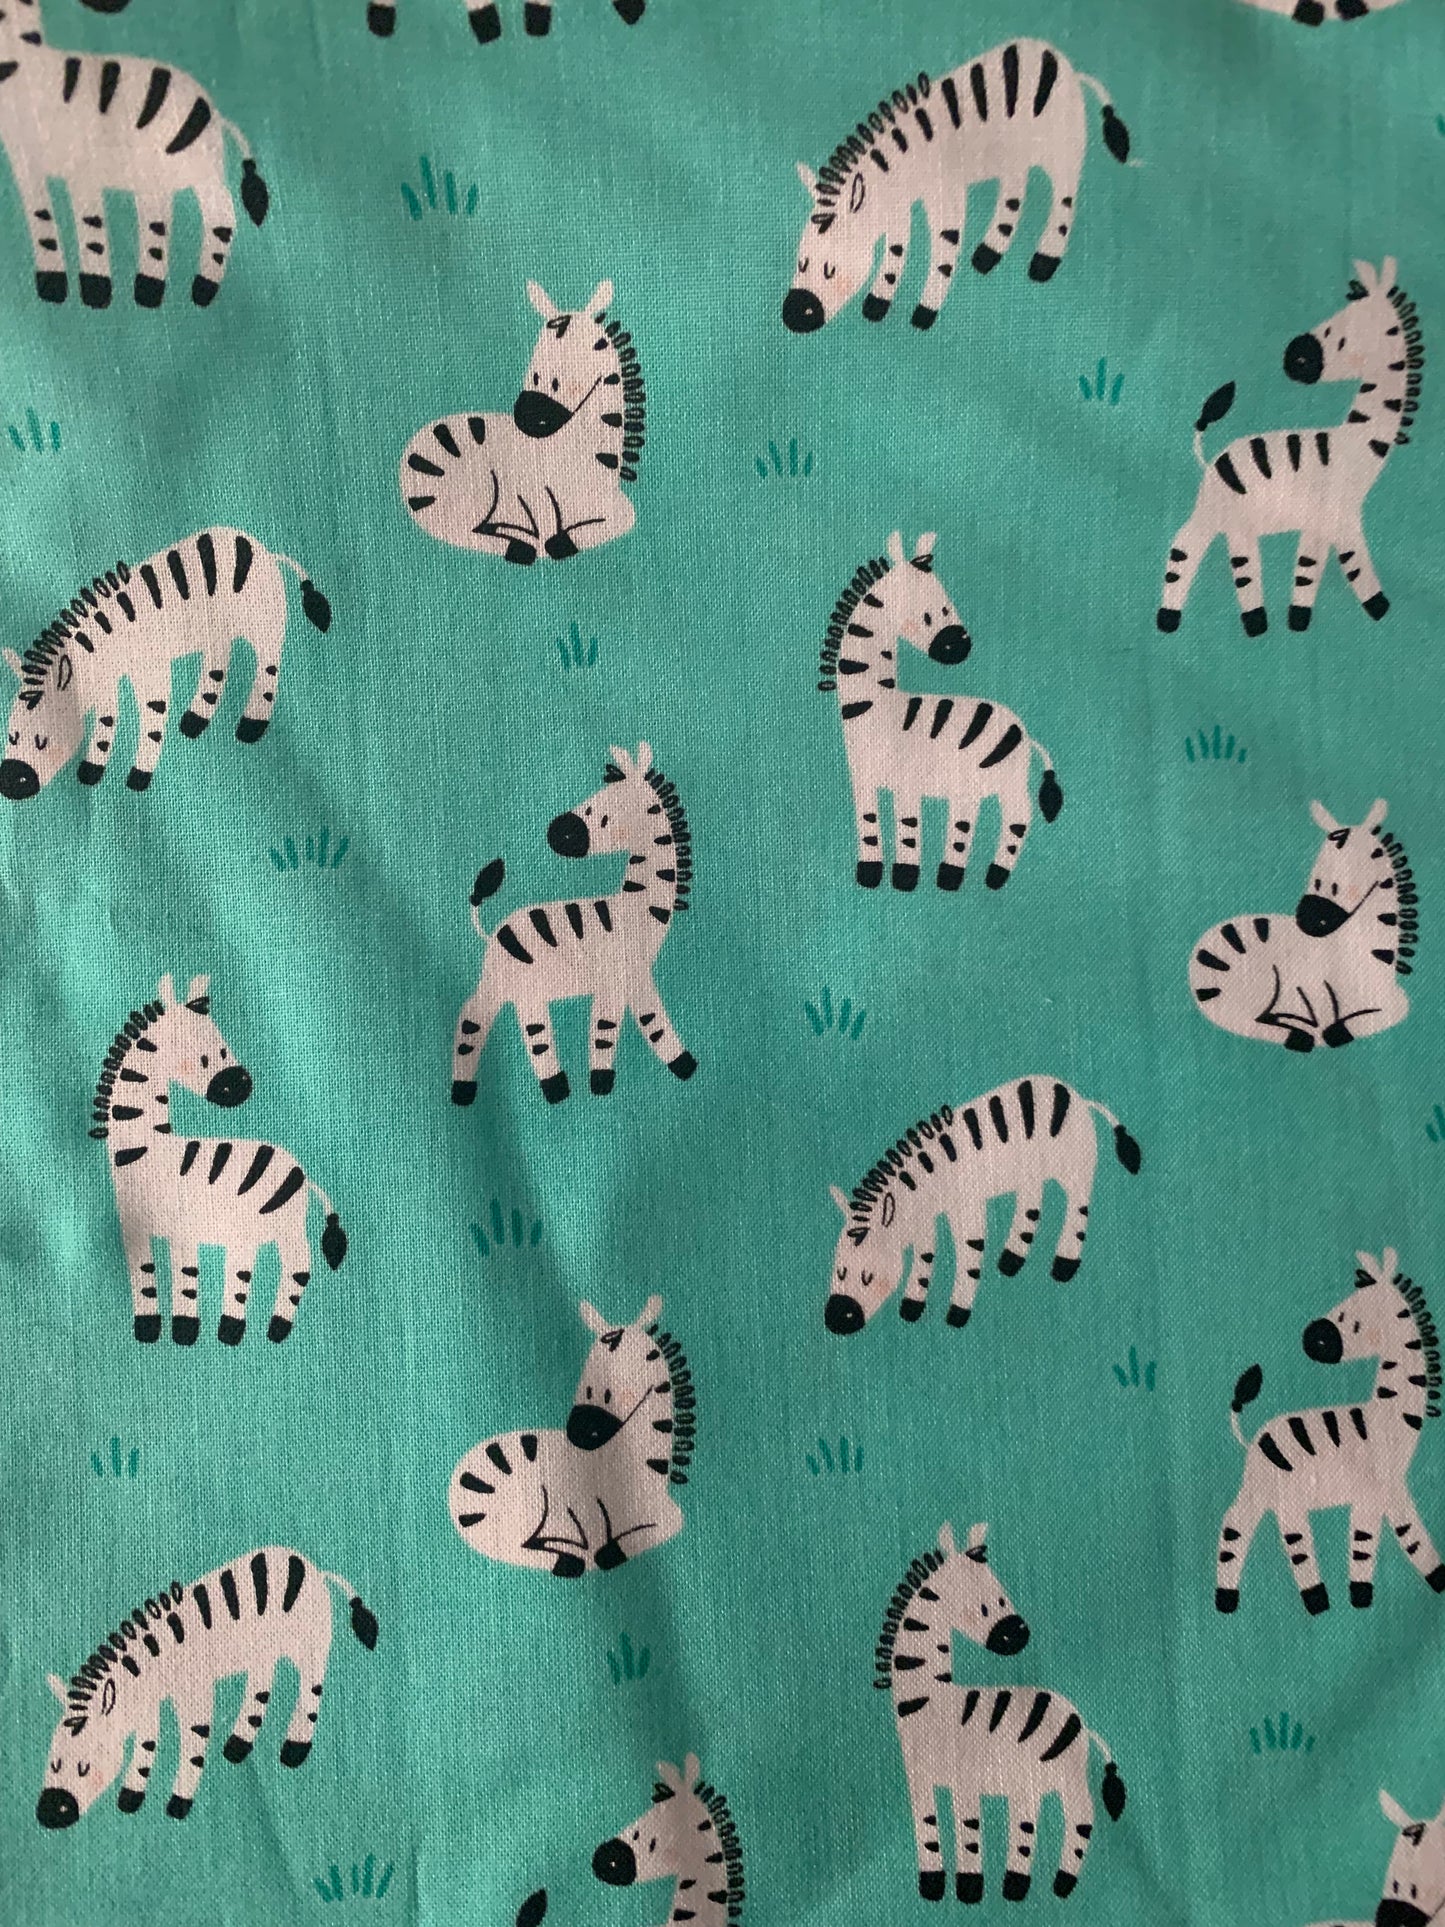 Lap Weighted Blanket, various prints with 5 lbs, bear, animal, robots, construction, dragons, zebra, washable lap blanket